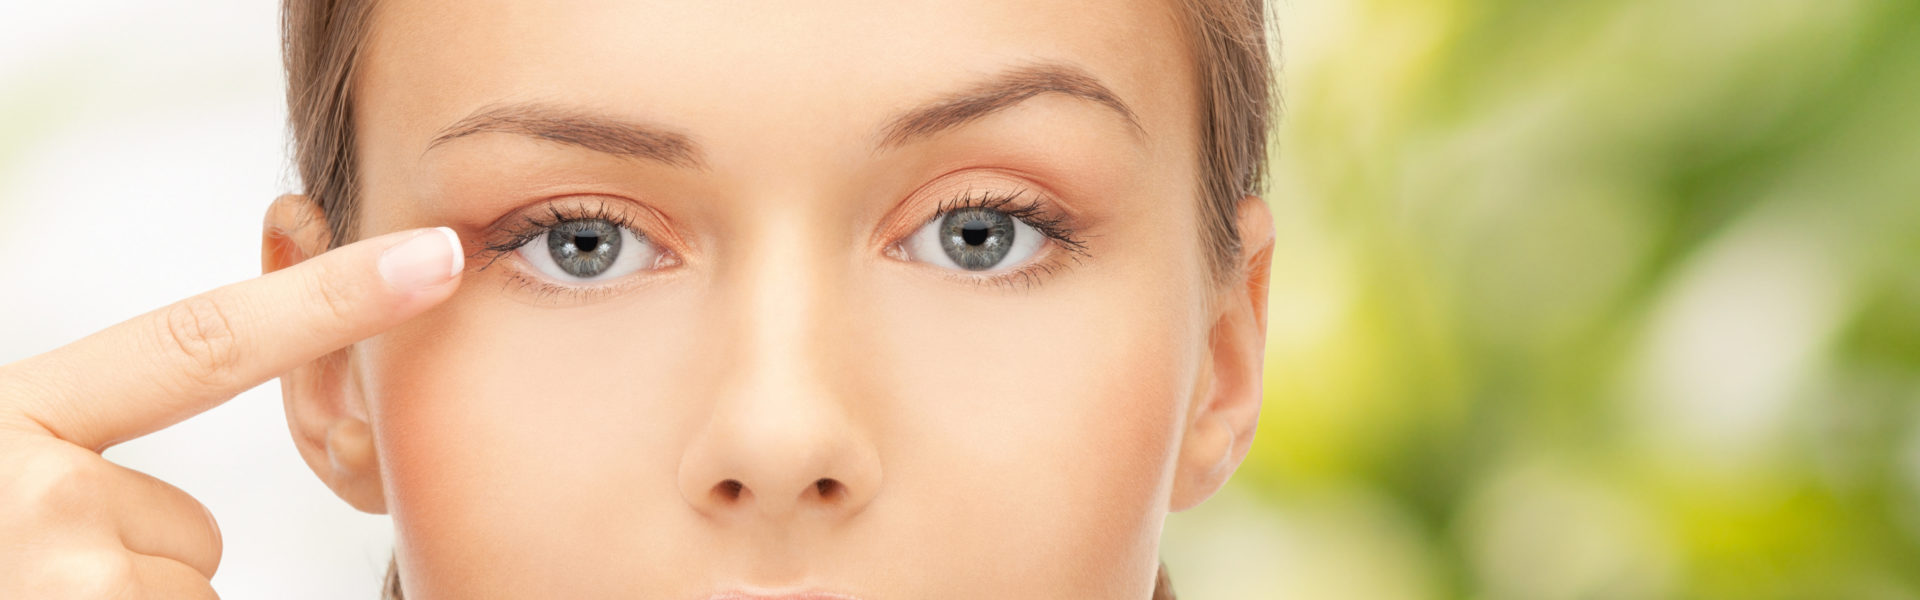 Rejuvenate Your Appearance with Eyelid Surgery banner